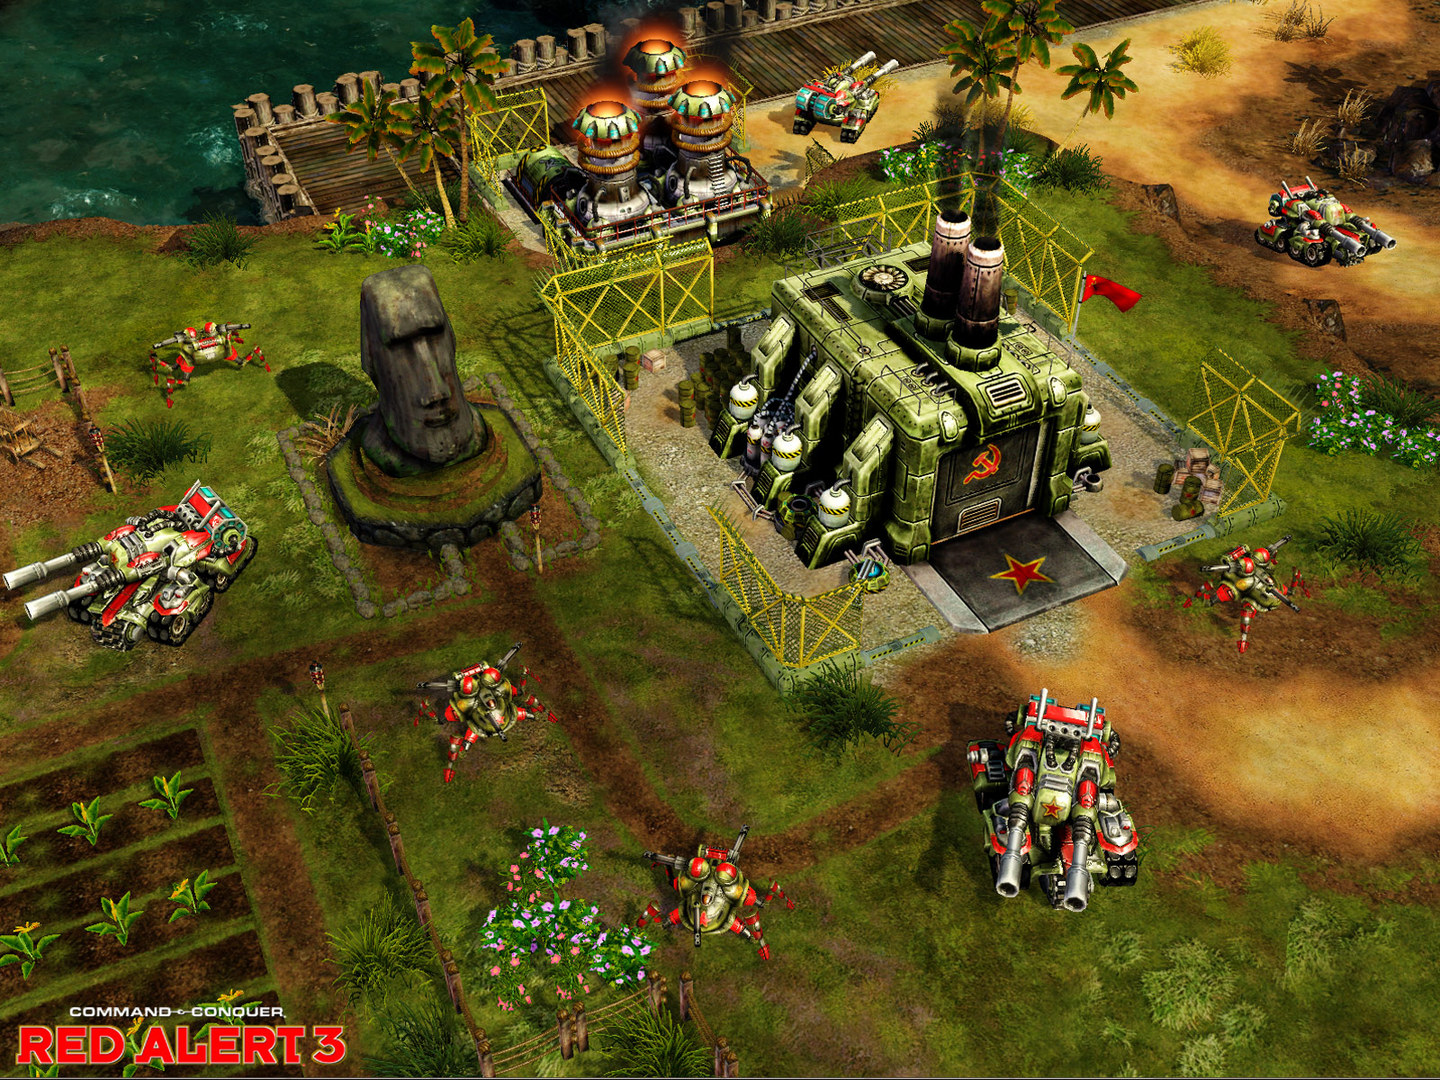 Save 75% on Command & Conquer: Red Alert 3 on Steam